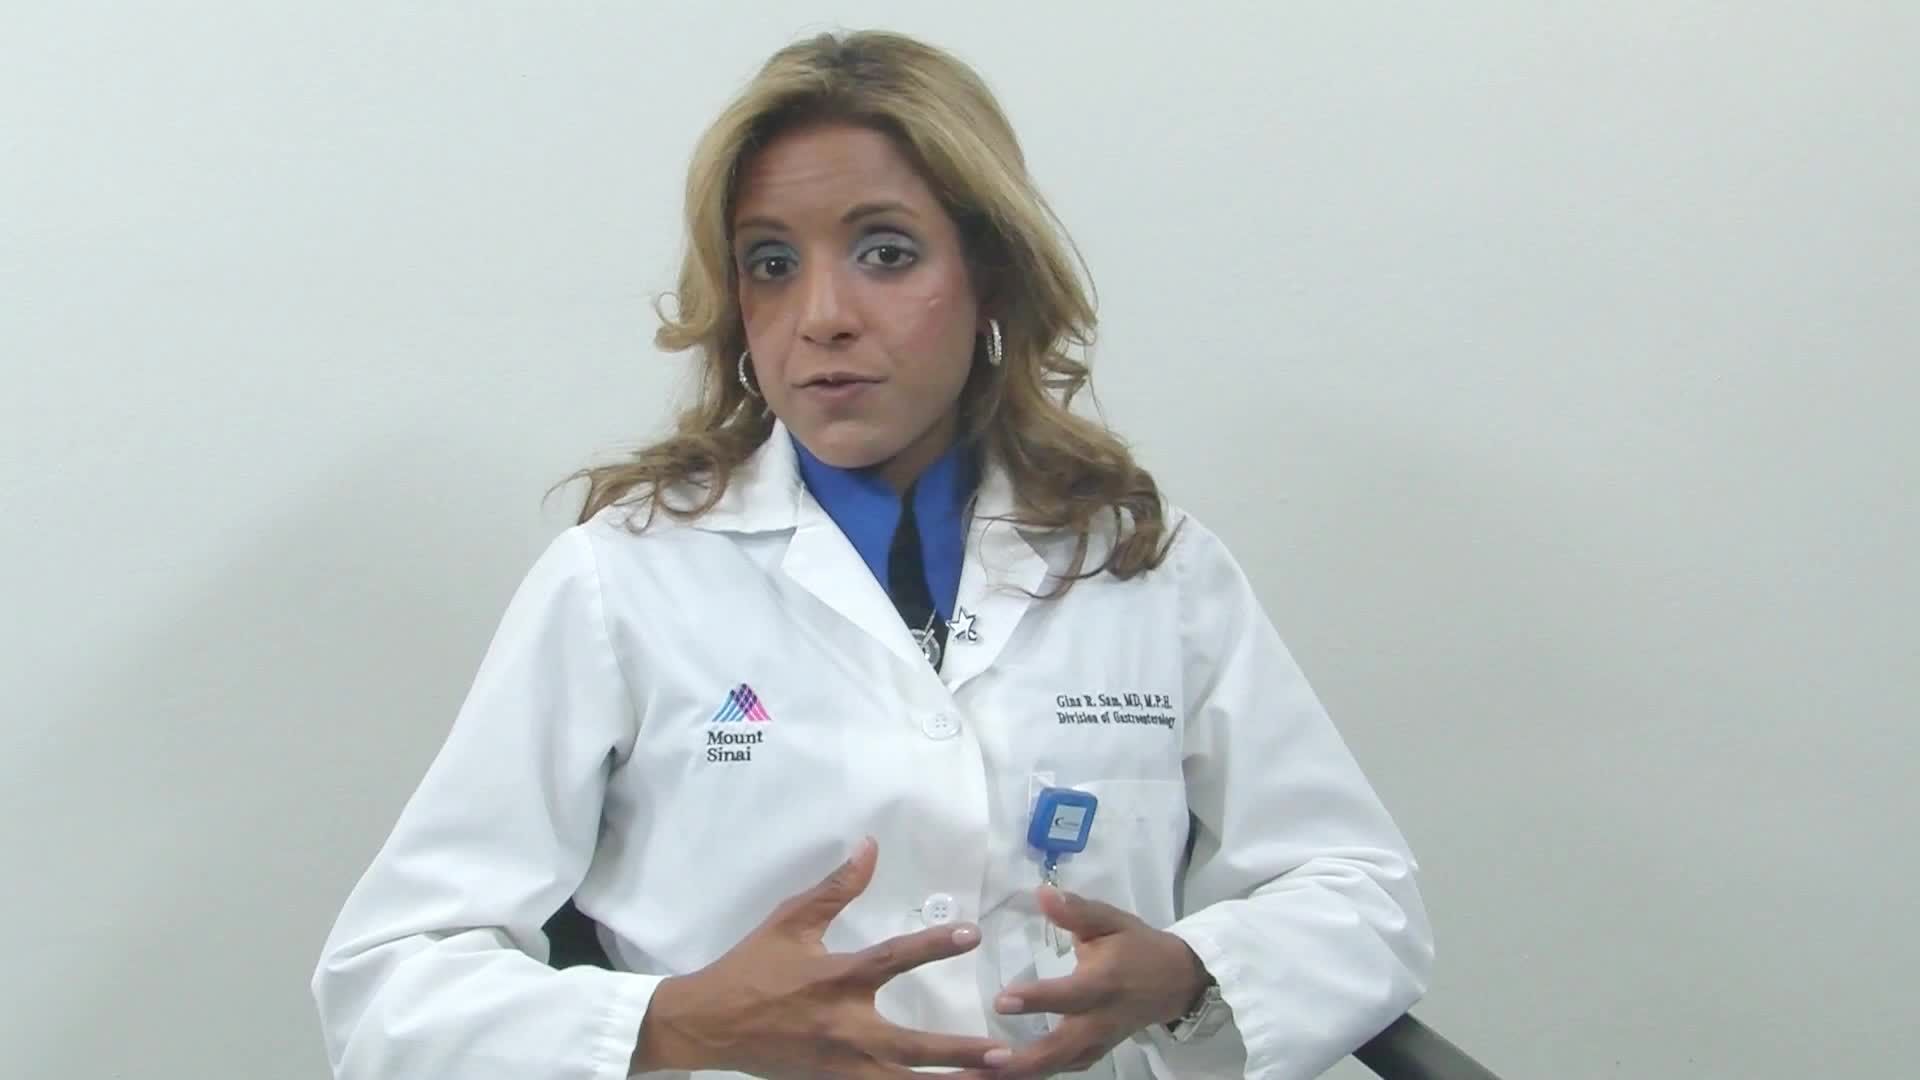 Dr. Gina R. Sam at Mt. Sinai Hospital - How To Decrease Your Risk of Developing Colon Cancer